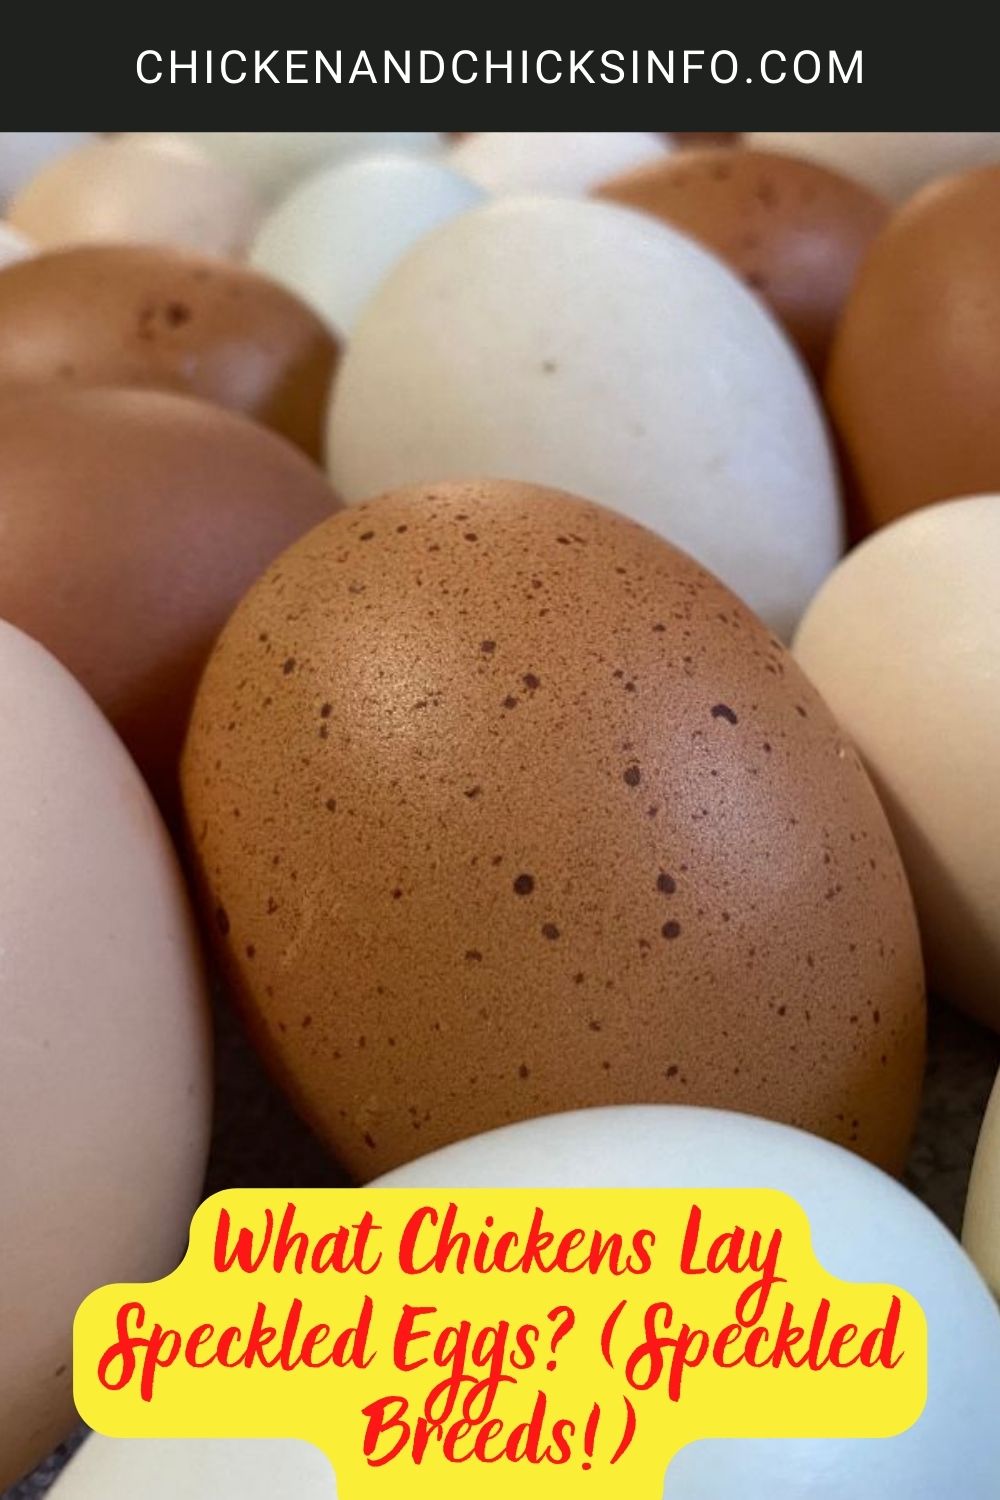 What Chickens Lay Speckled Eggs? poster